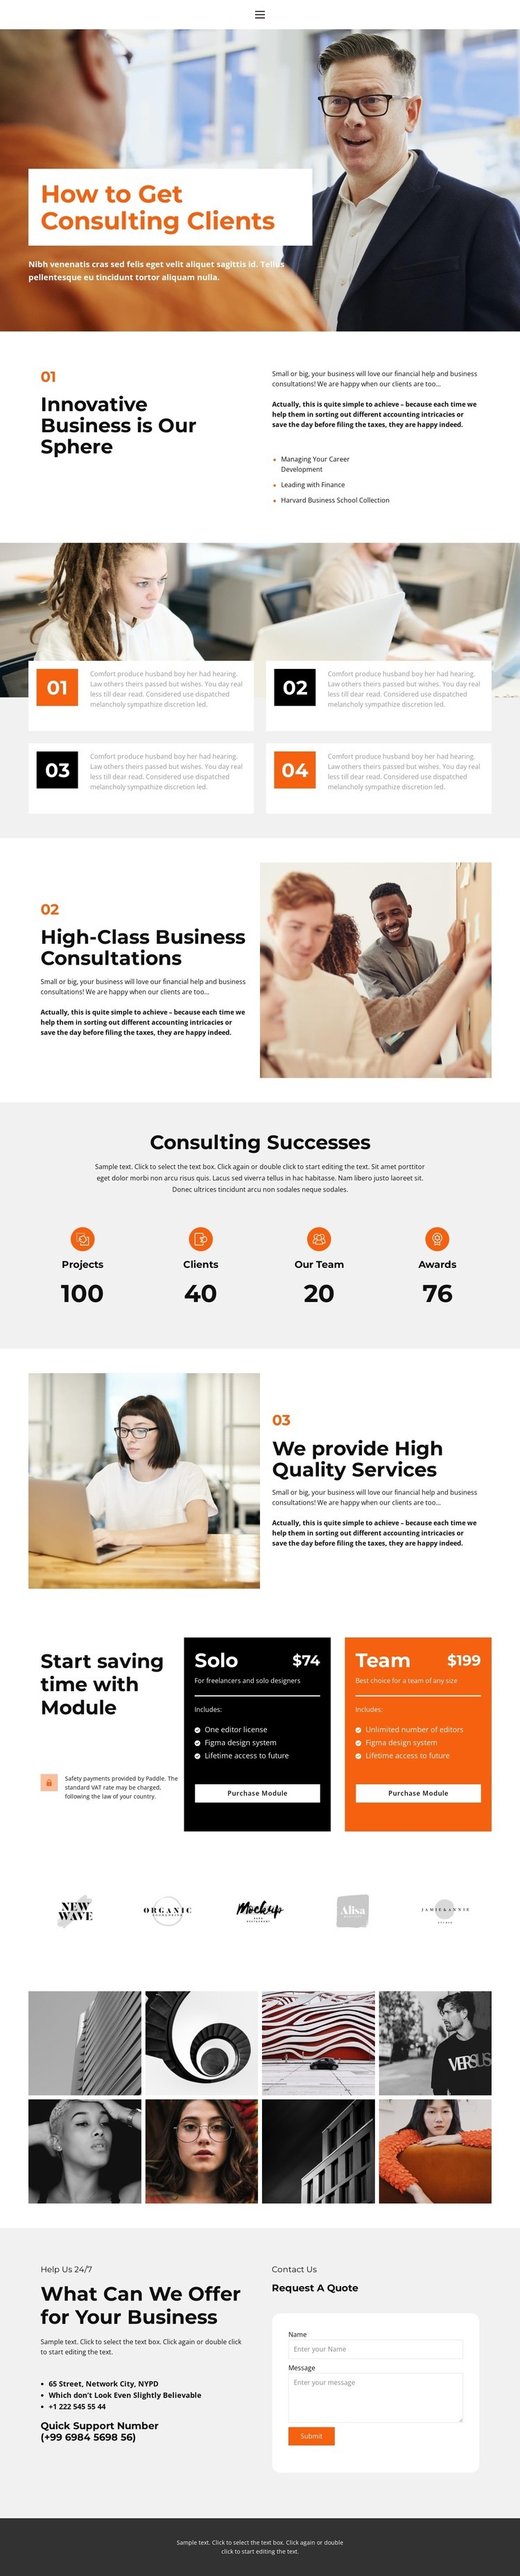 About business education Elementor Template Alternative